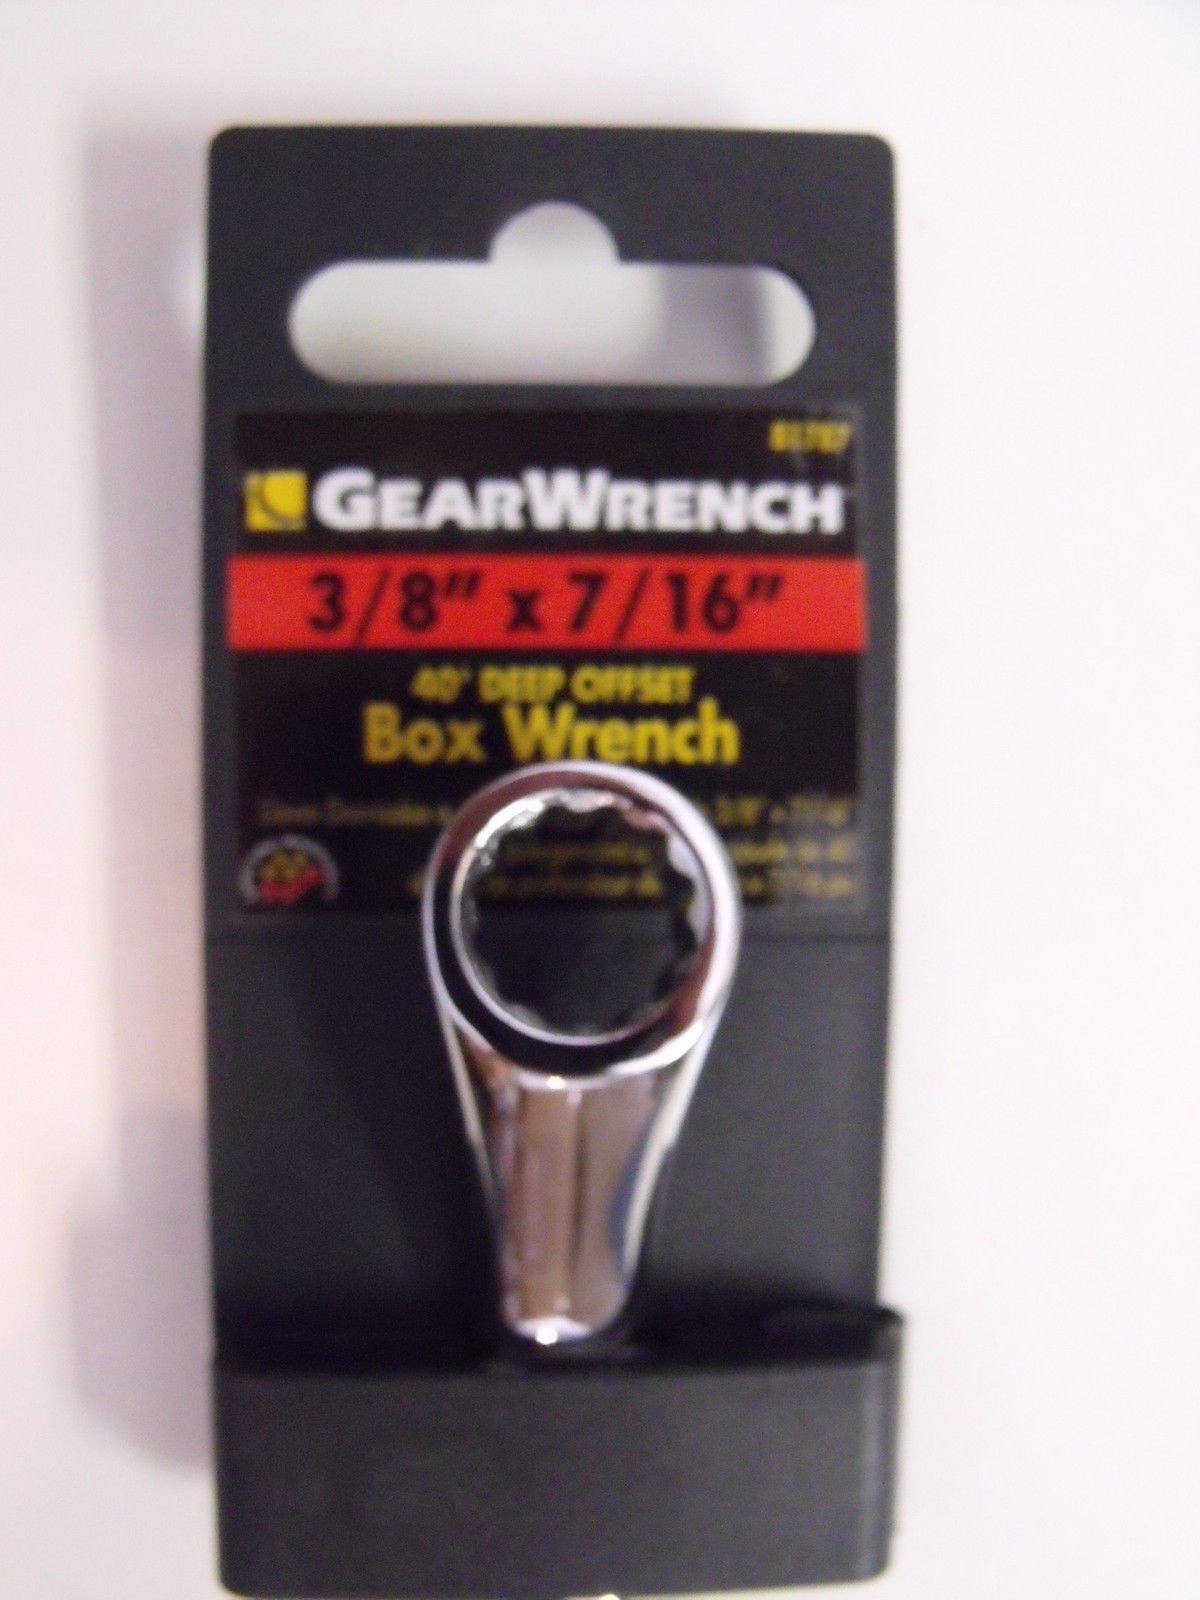 Gearwrench 81787 3/8" x 7/16" Offset Box Wrench Full Polish